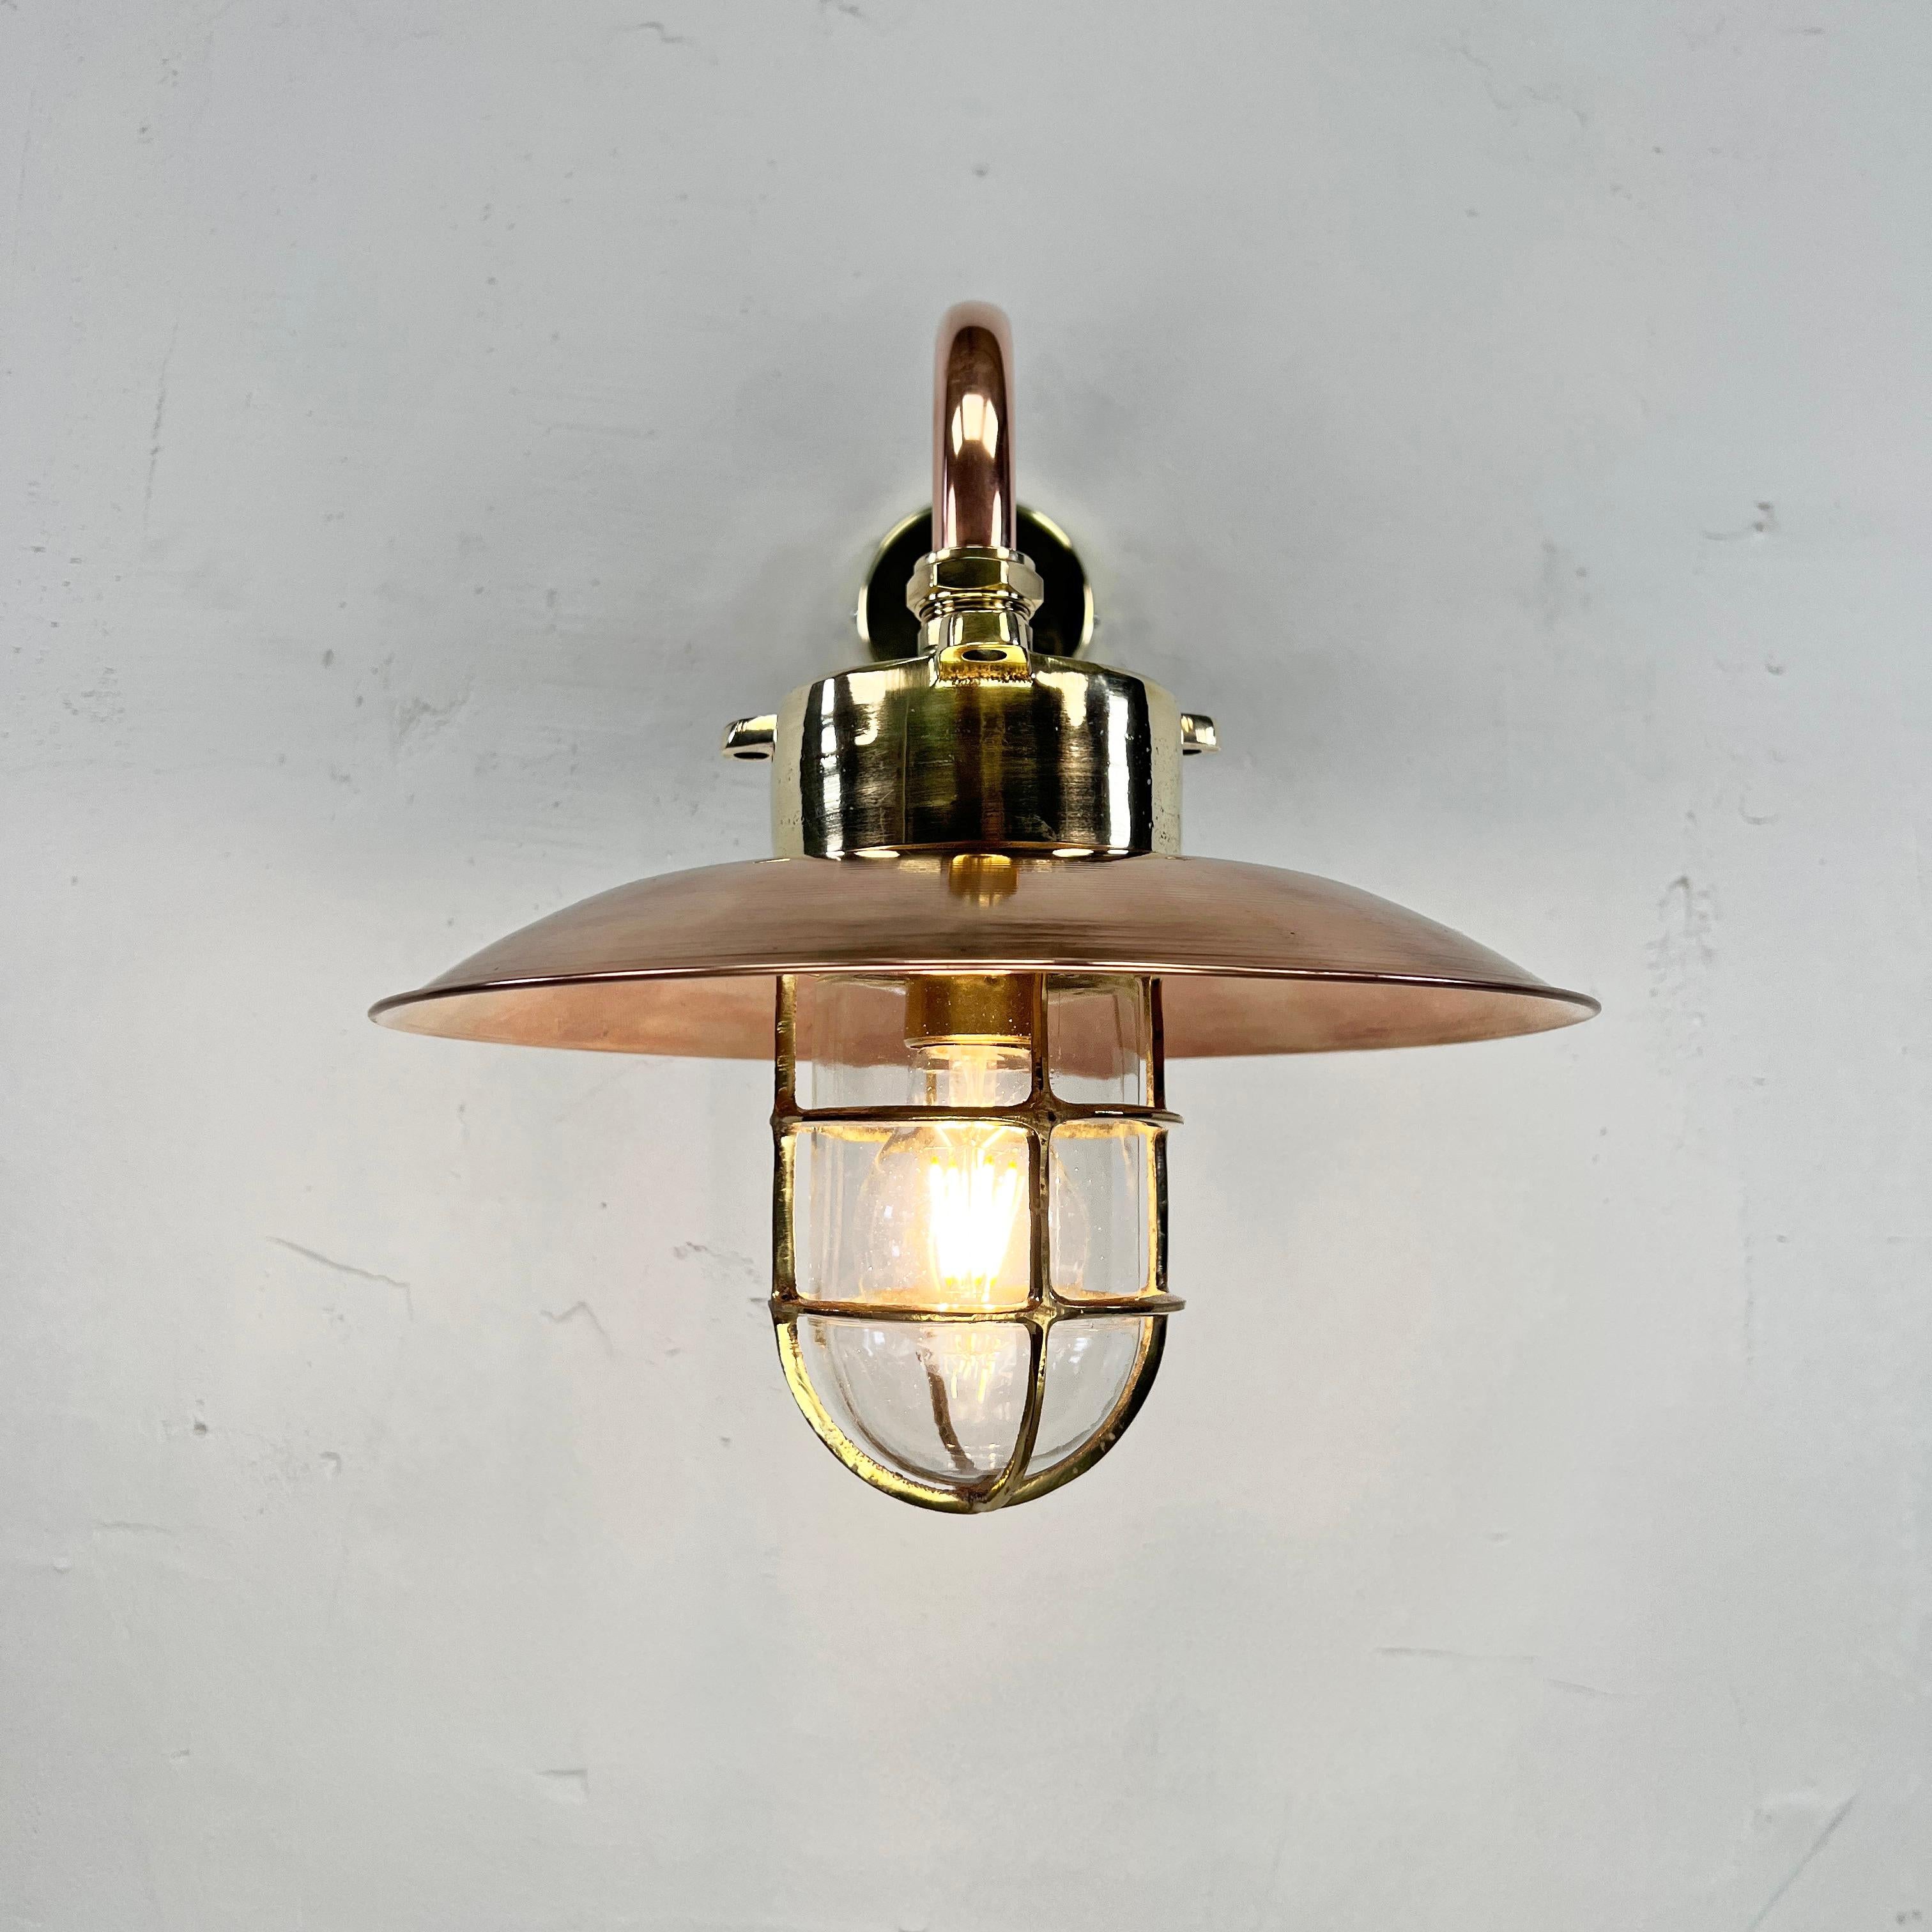 1970s Japanese Cast Brass and Copper Explosion Proof Caged Cantilever Wall Light For Sale 10